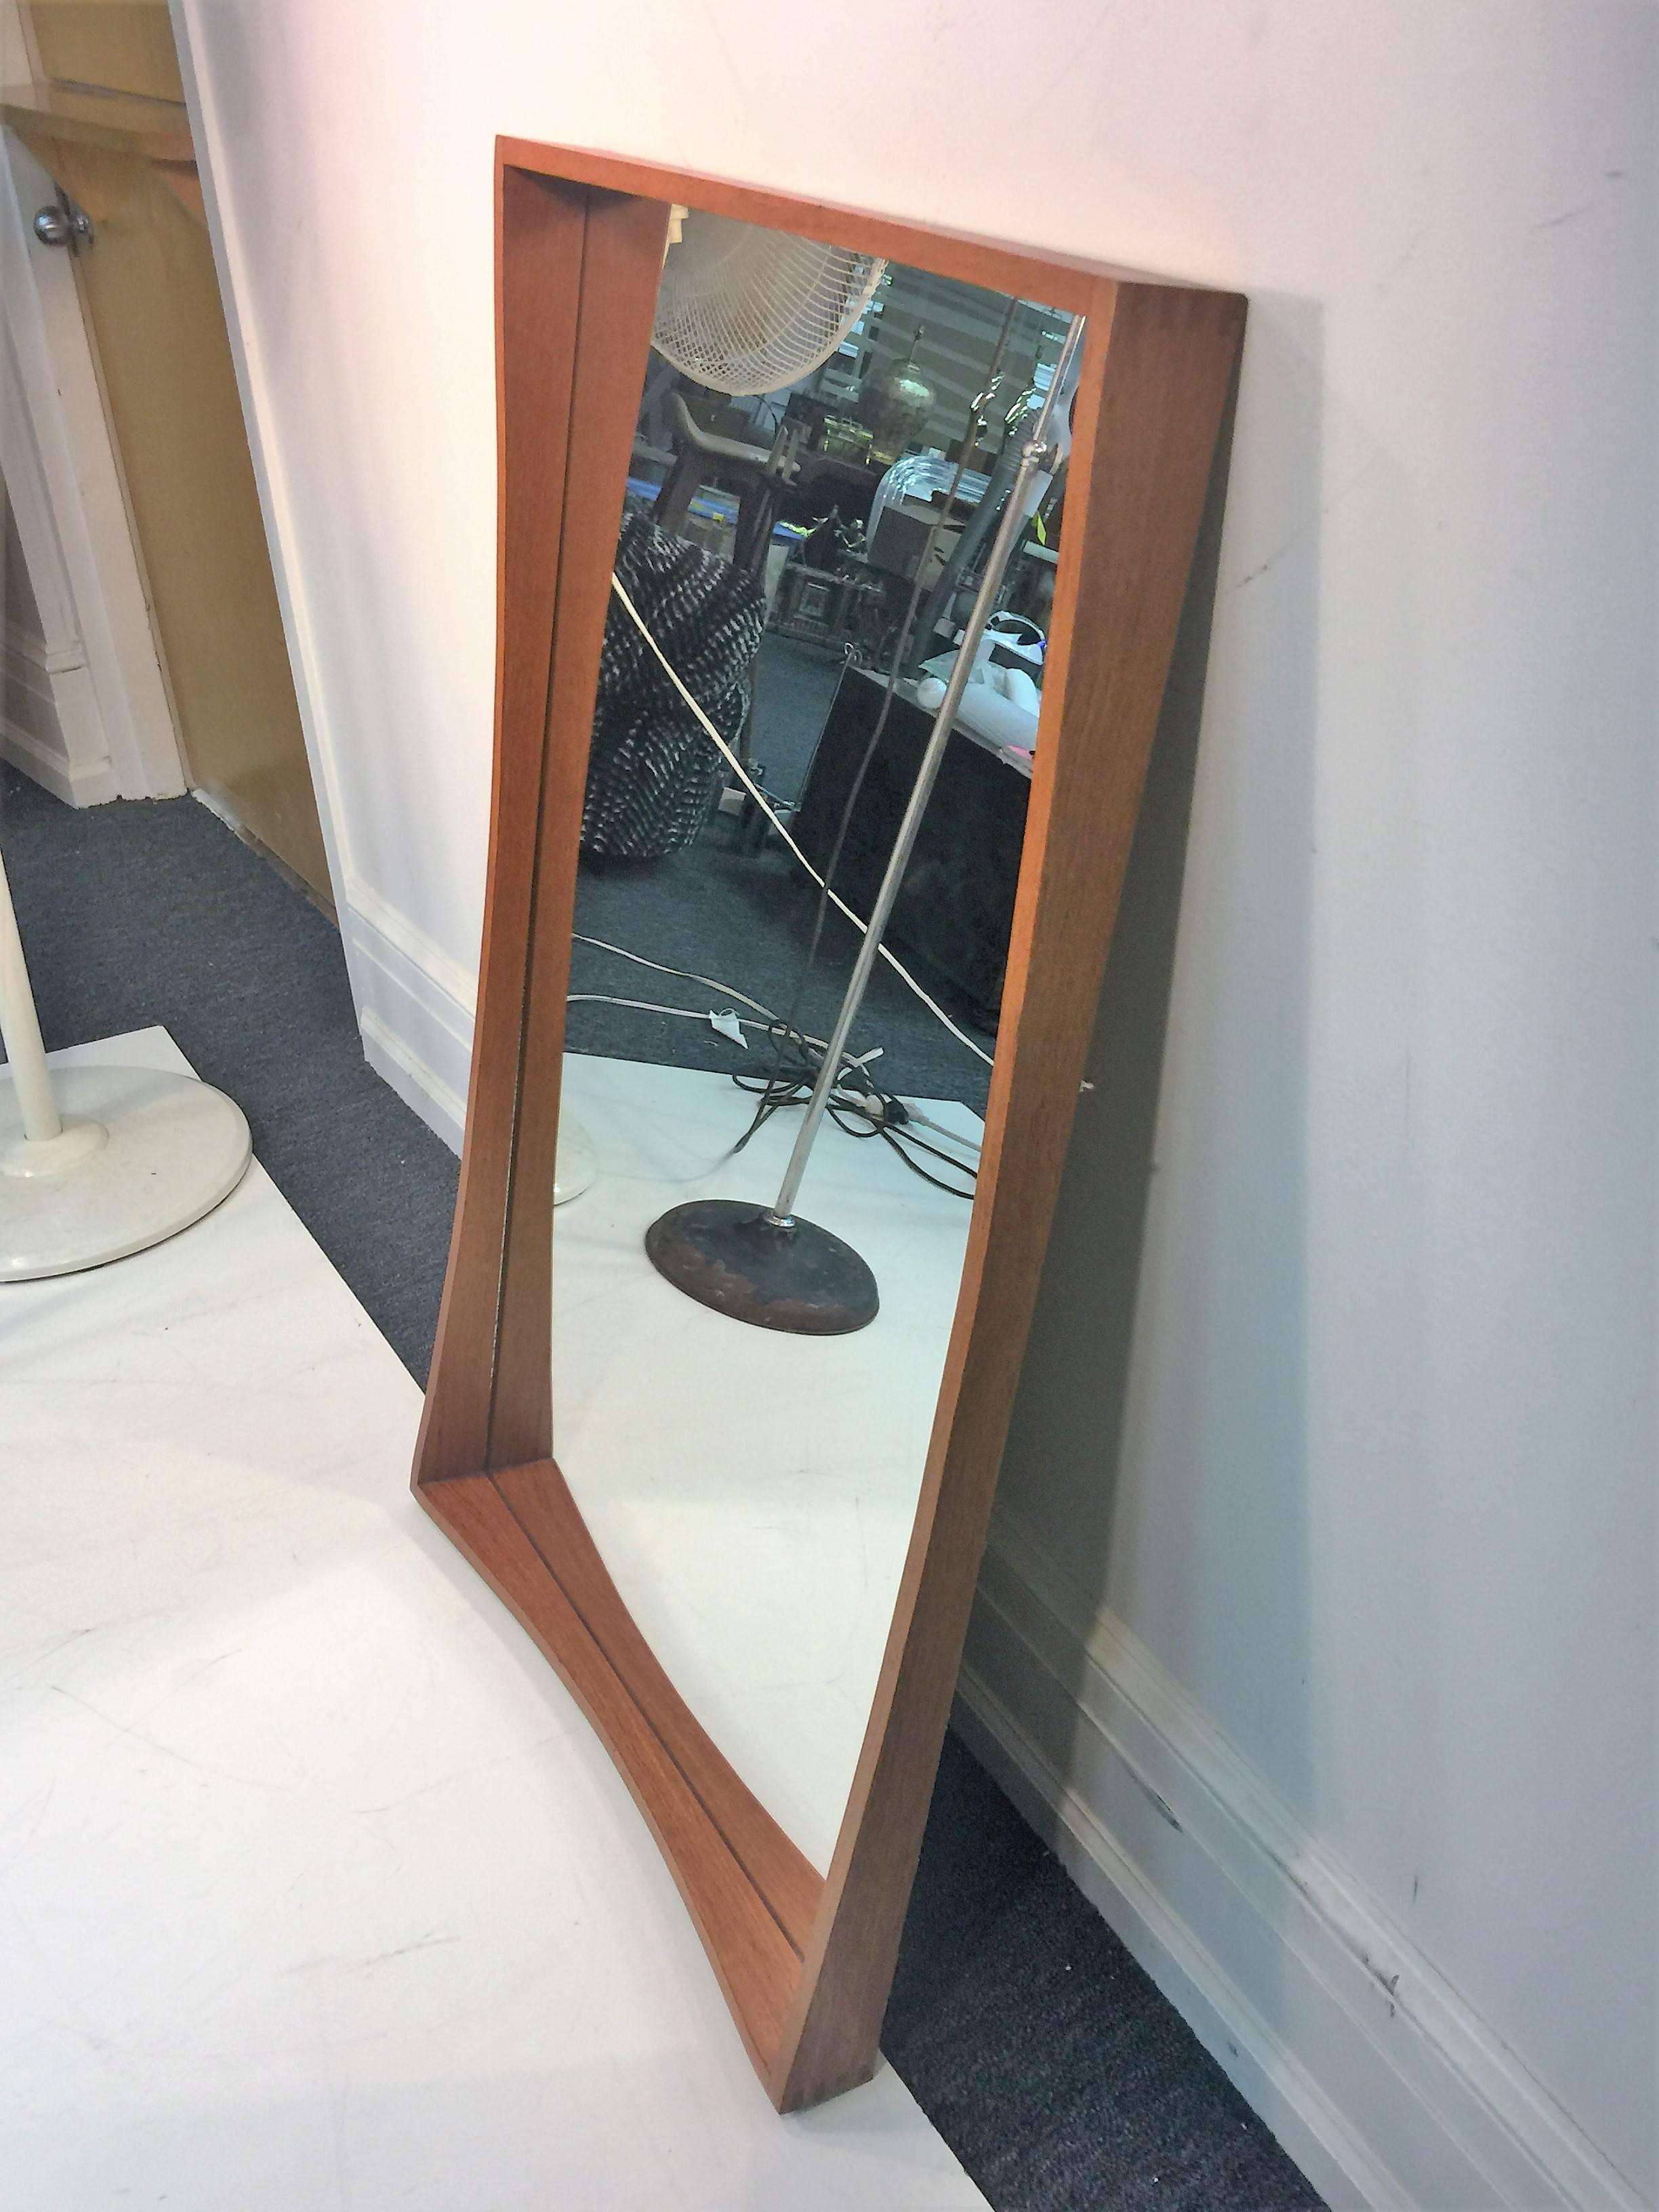 Great trapezoidal teak mirror designed and made in Denmark, circa 1960s. Wonderful sculptural and refined design with splined technique at the corners. A perfect mirror that would suit many interiors with Mid-Century Modern.